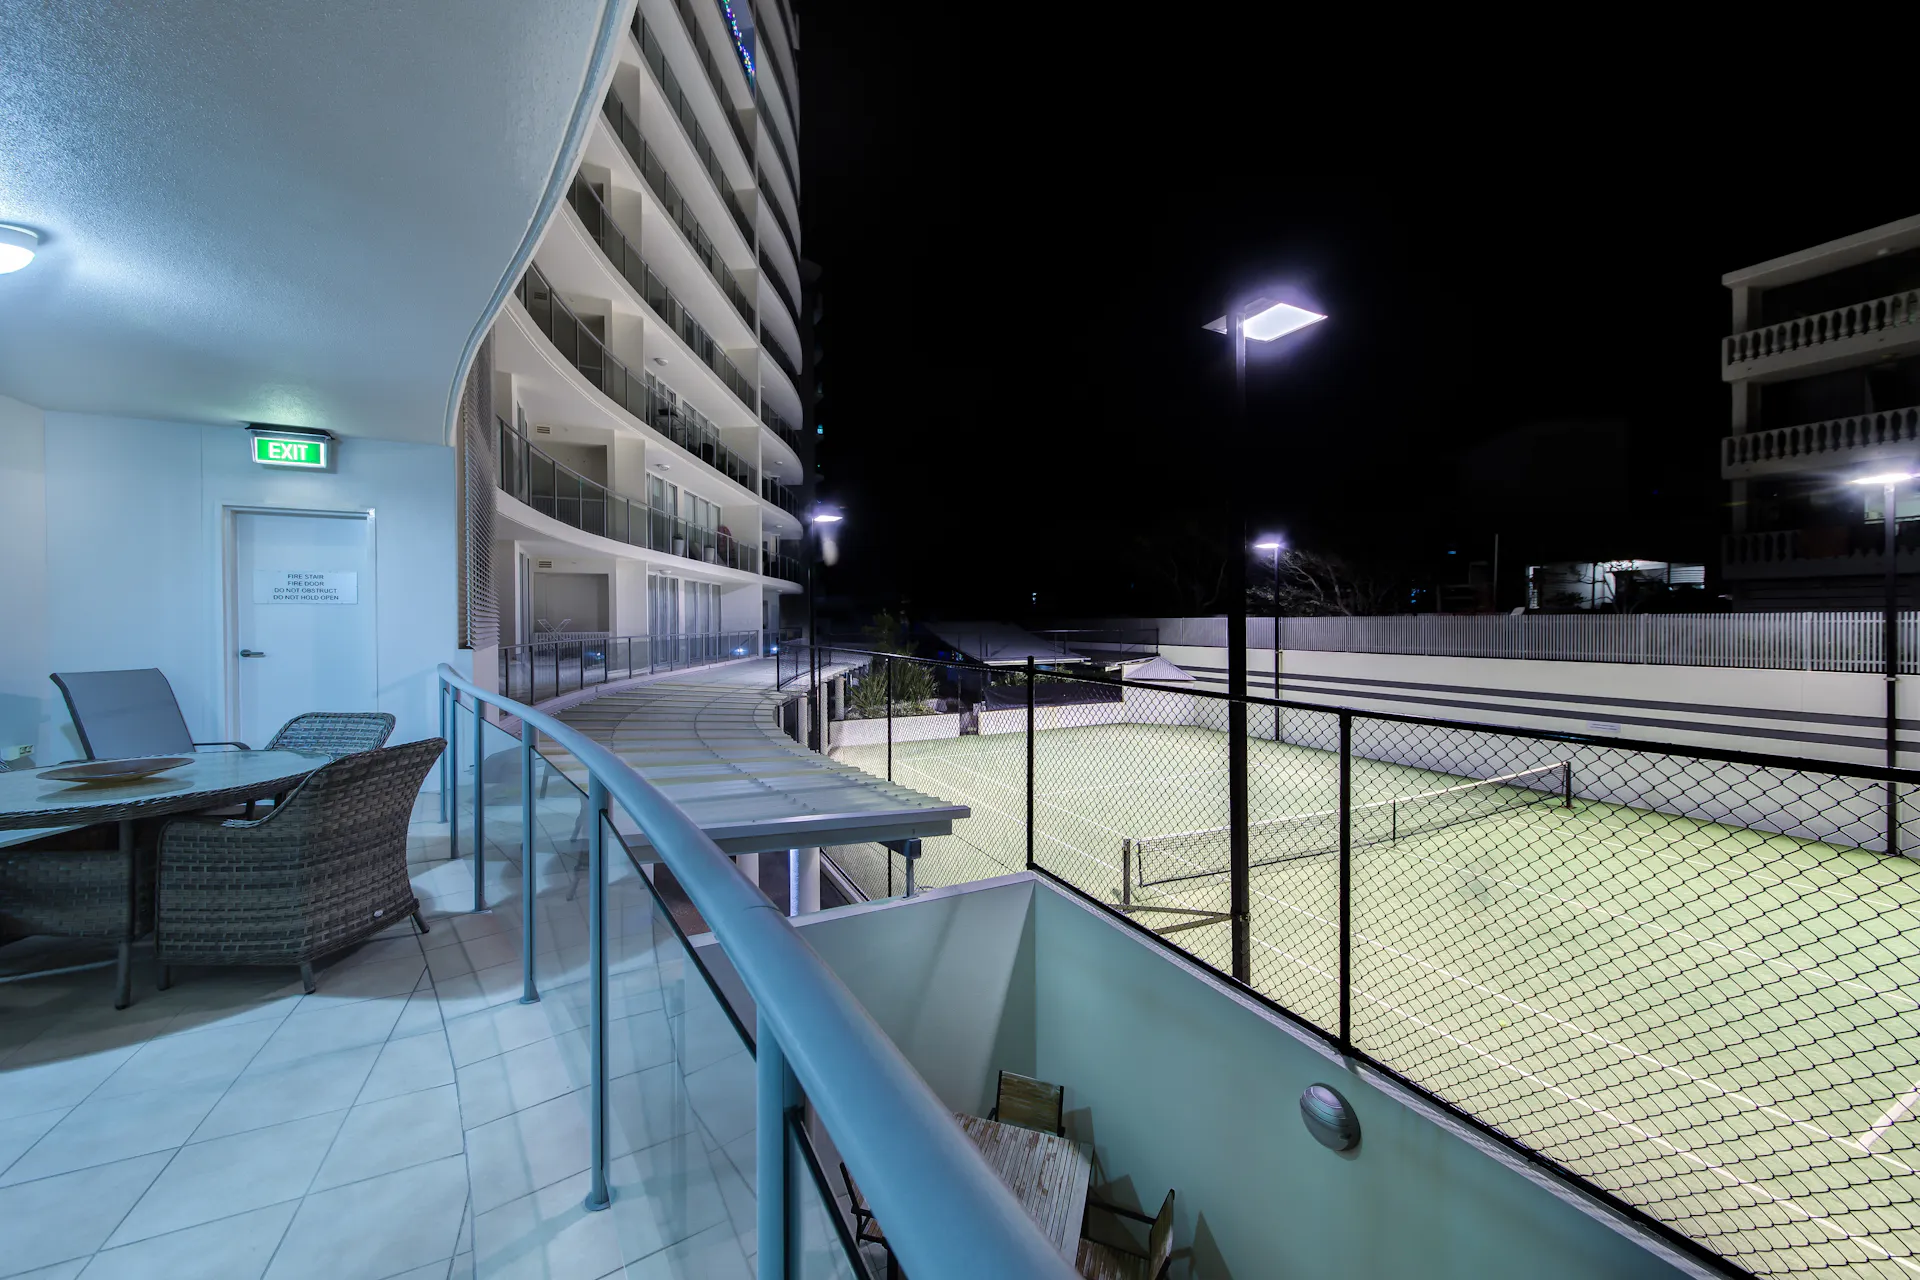 View of Tennis Court. With night lighting you can enjoy a game up to 9 at night